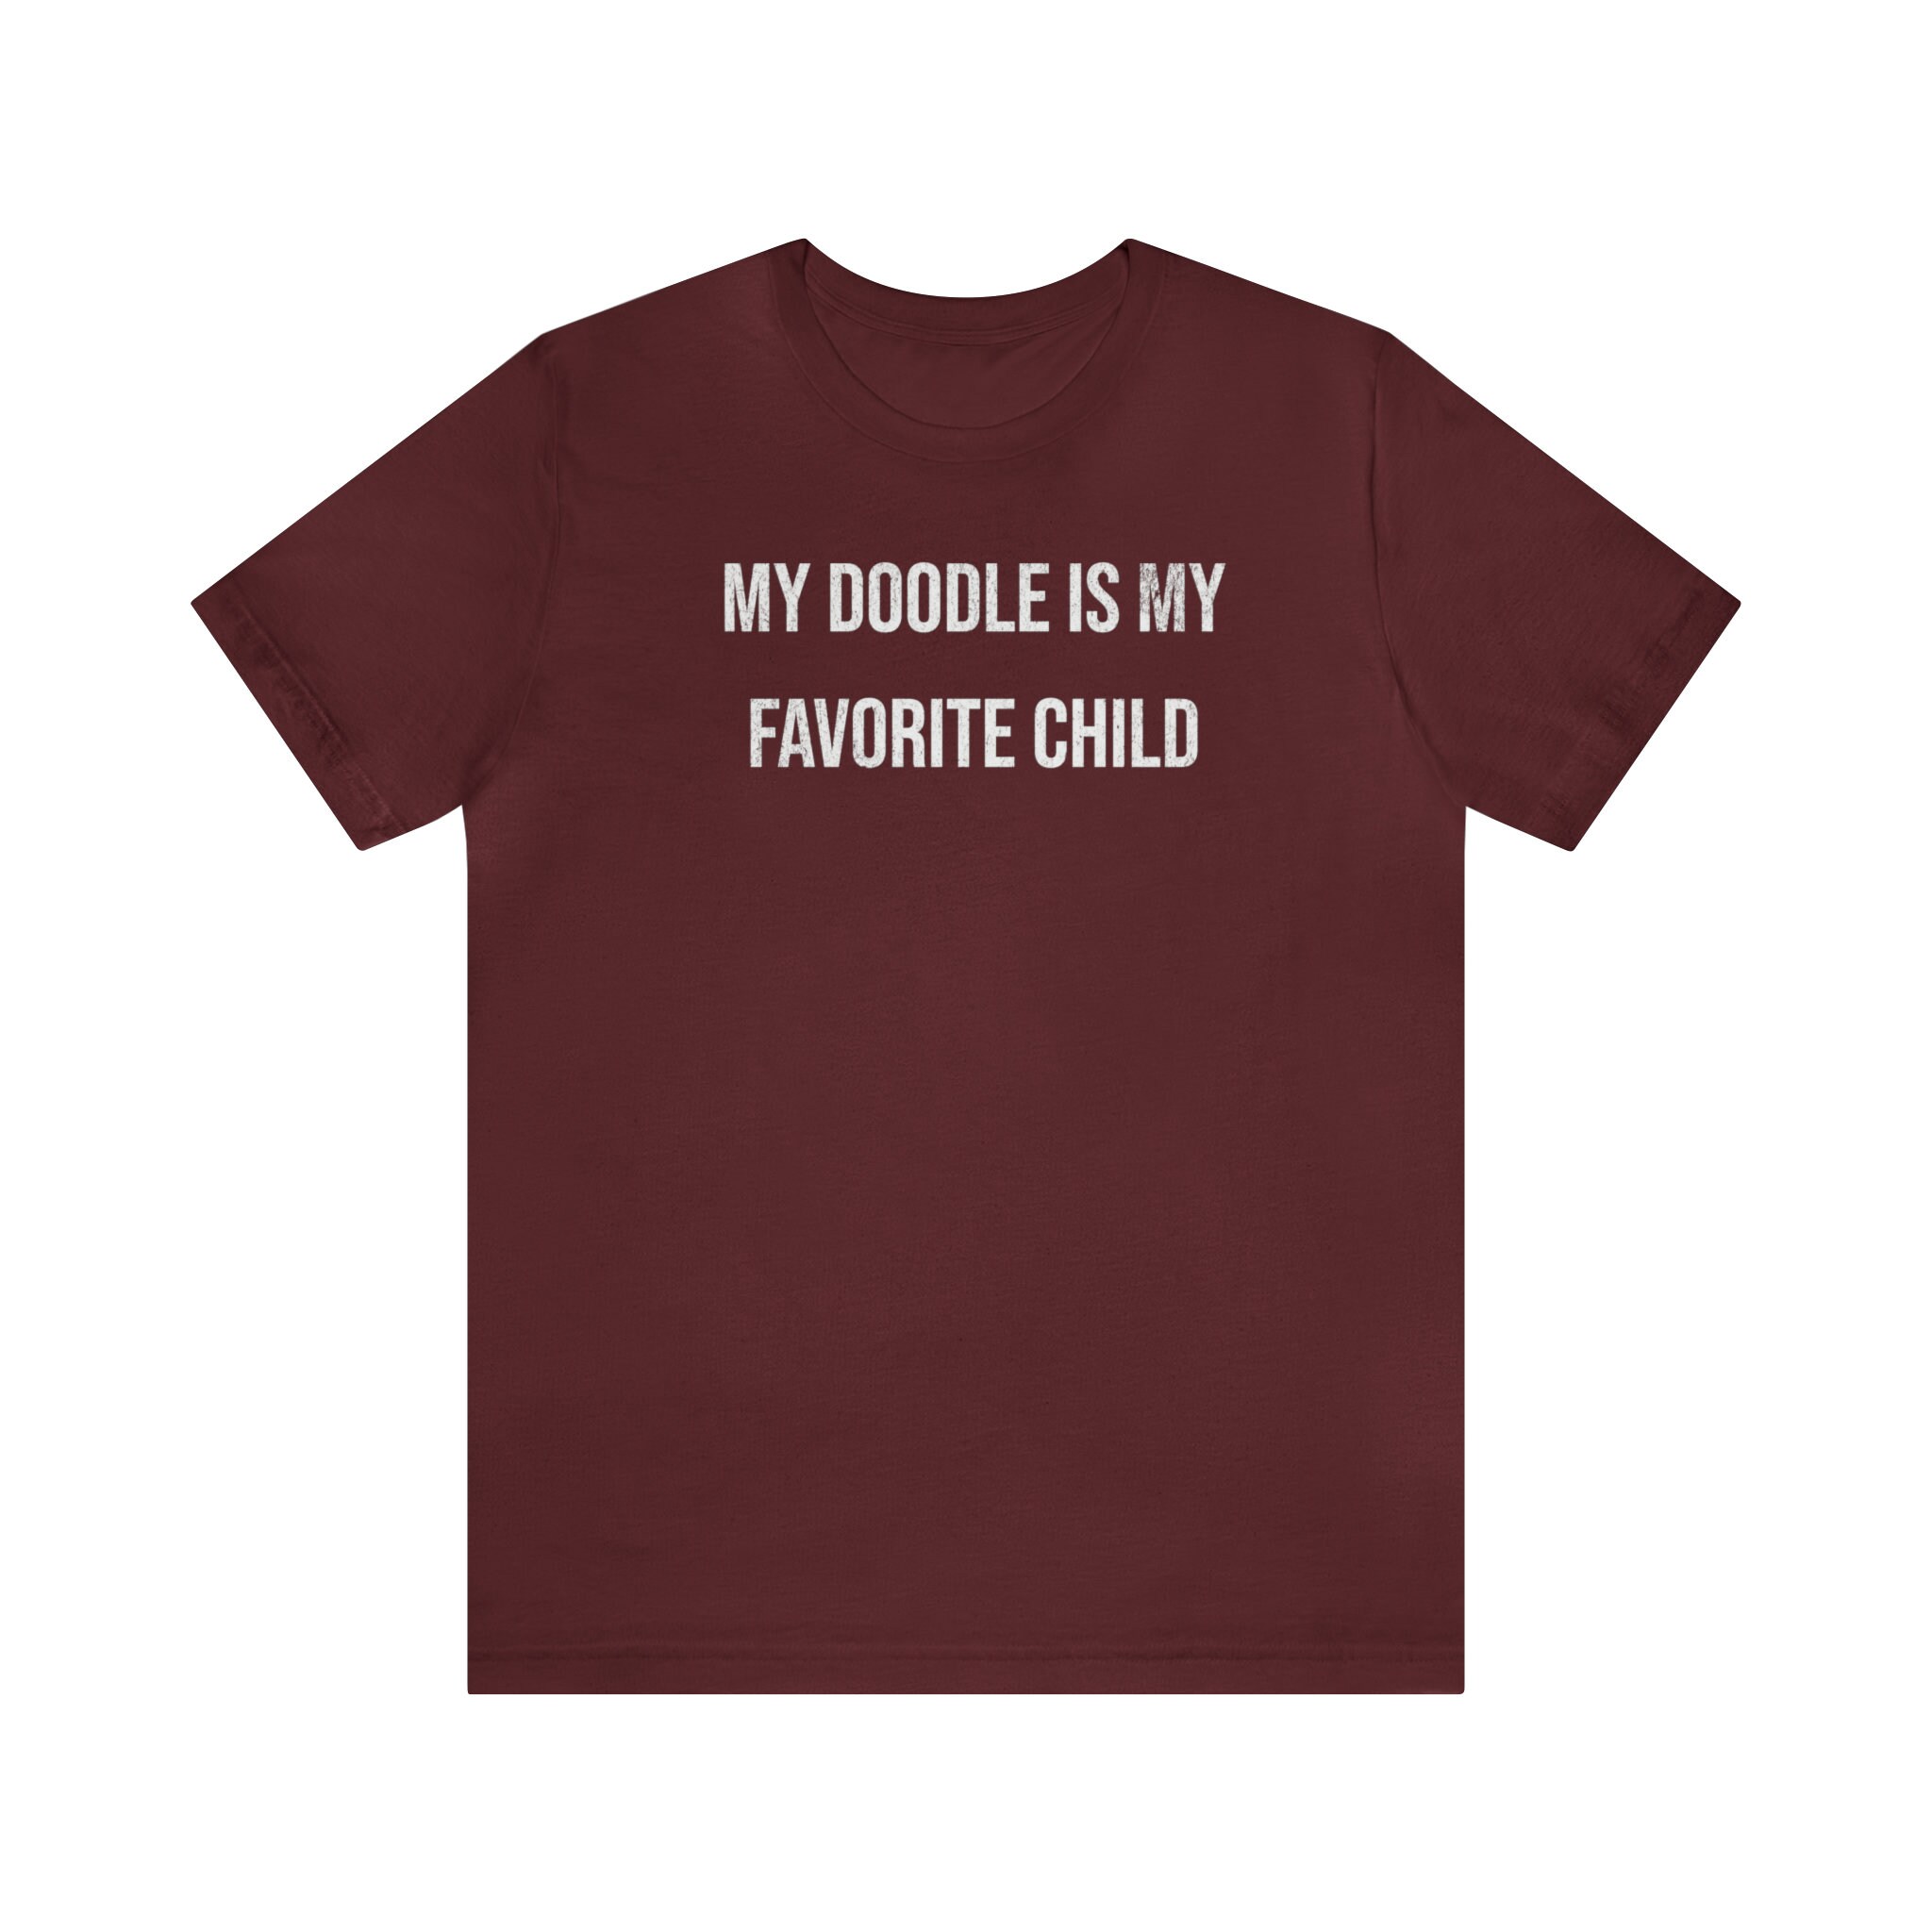 My Doodle is My Favorite Child, Funny Dog Lover T-shirt, Gift for Doodle  Dog Owner, Cute Puppy Dog Meme, Sarcastic, Weird Tee 